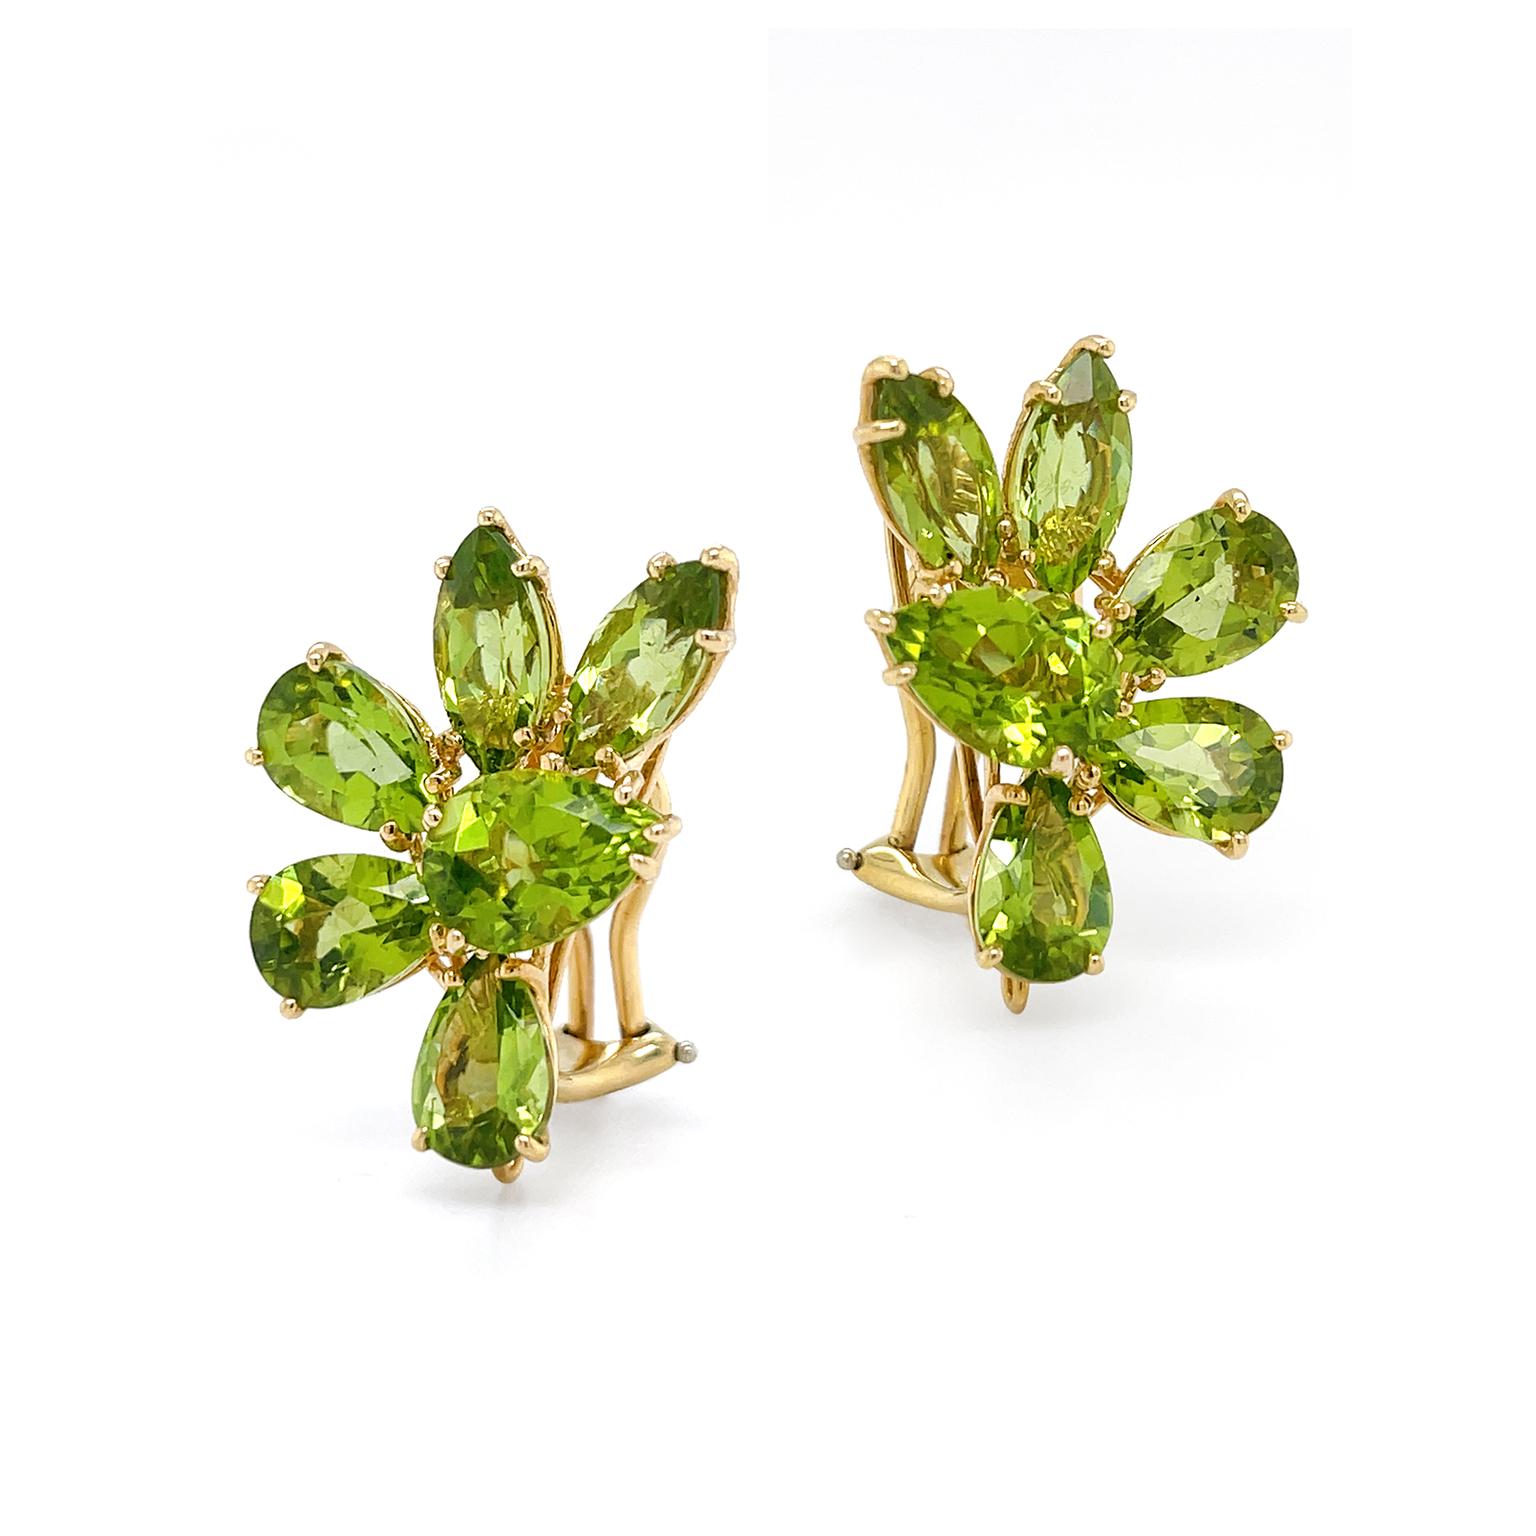 Olive-green radiance of peridot is presented in these earrings. A single pear cut of the gem is orbited halfway by illuminating two marquise and three pears. Marquise cuts accentuate both the depth and weight of the gem, while the pear cuts lift